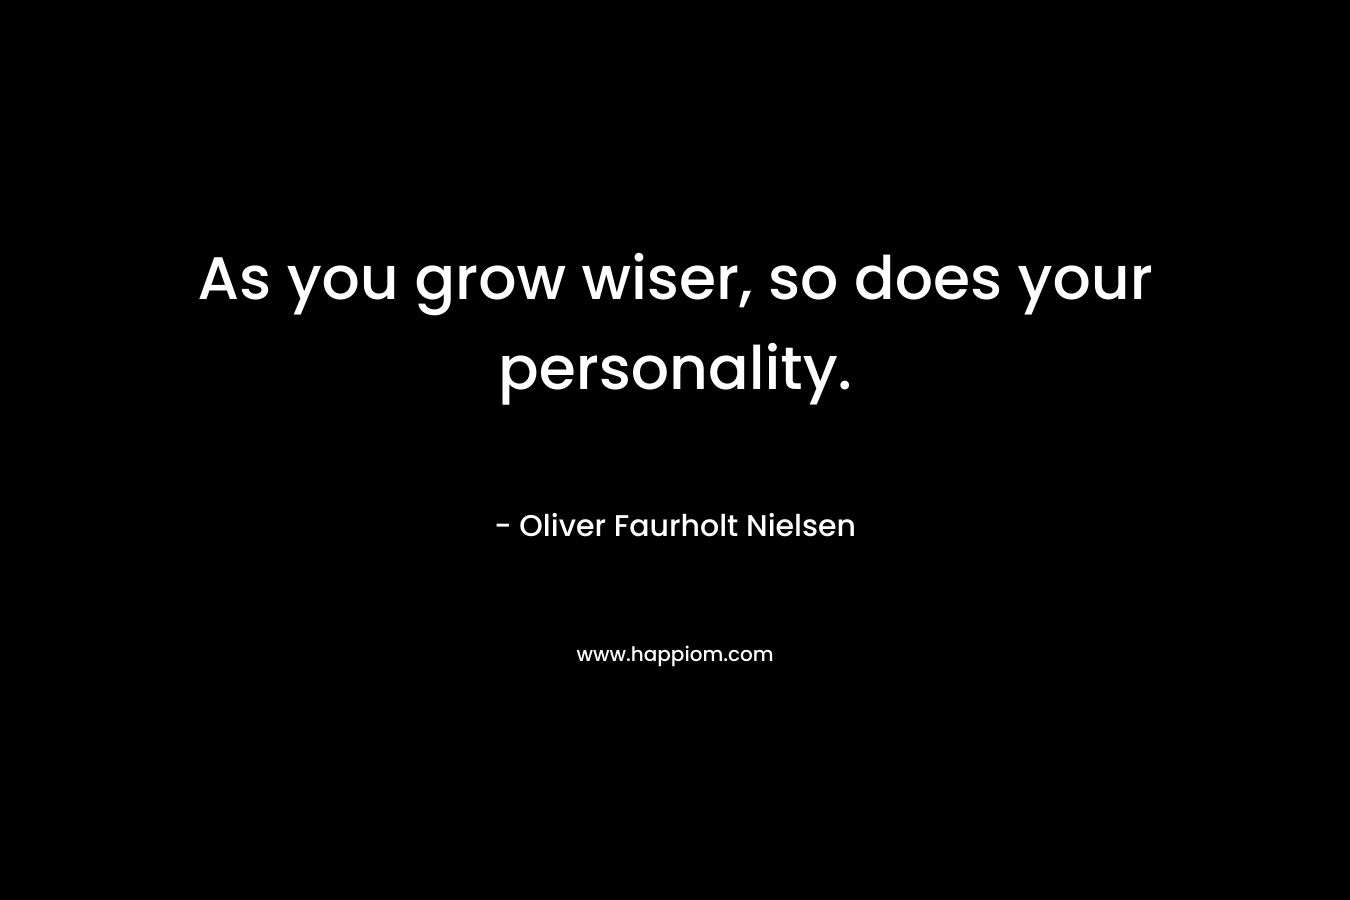 As you grow wiser, so does your personality. – Oliver Faurholt Nielsen